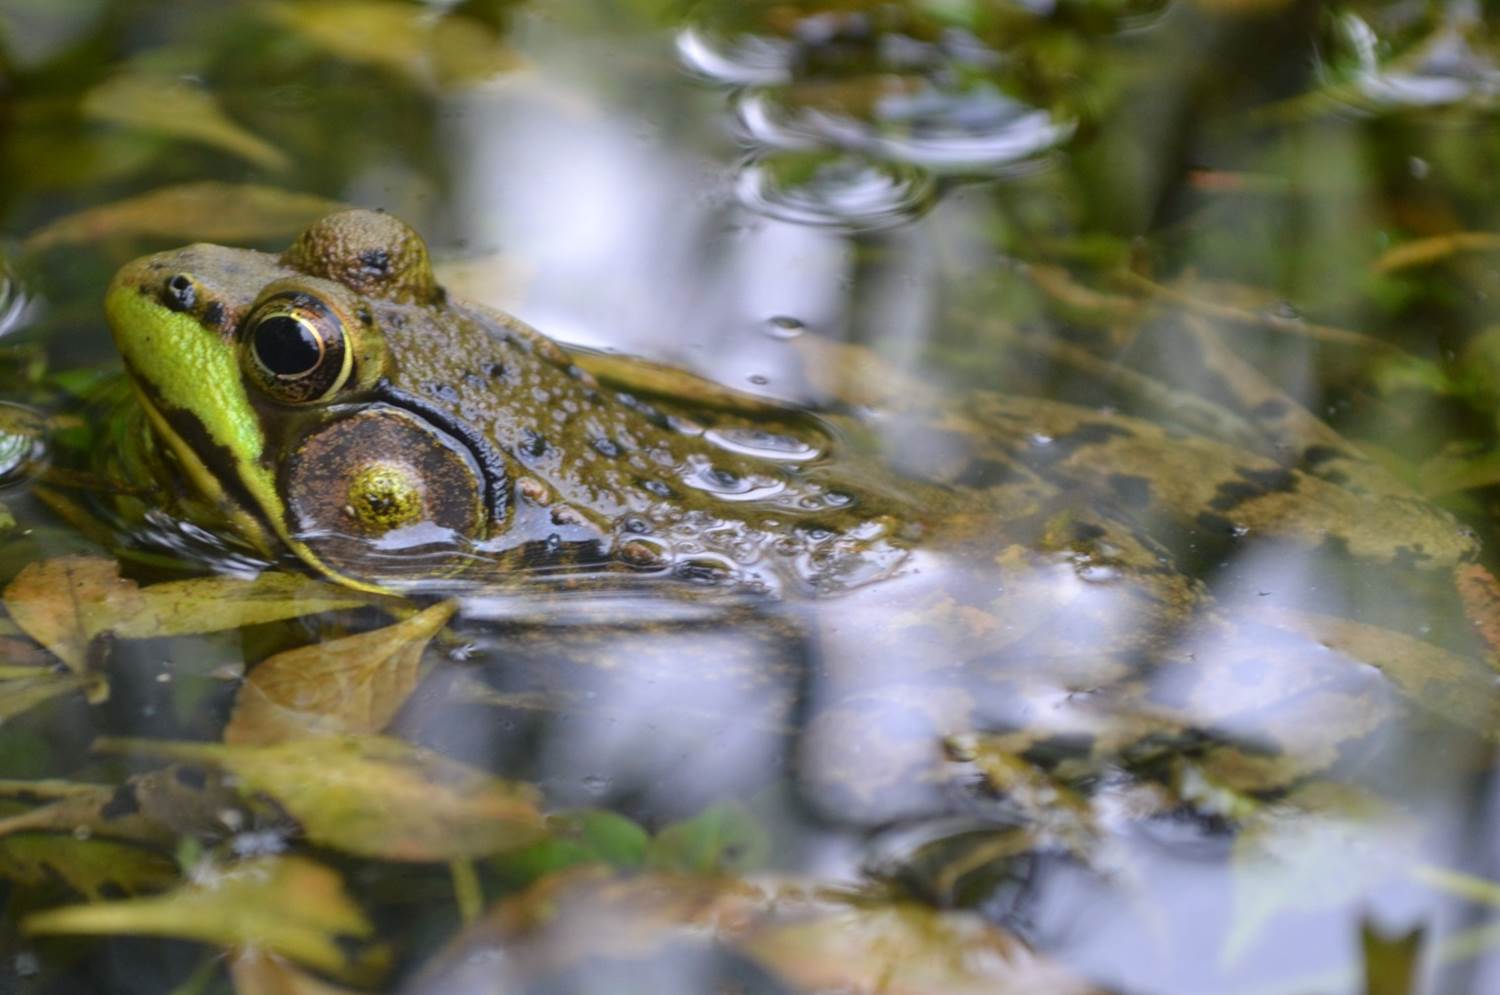 A frog's head coming out of the water.